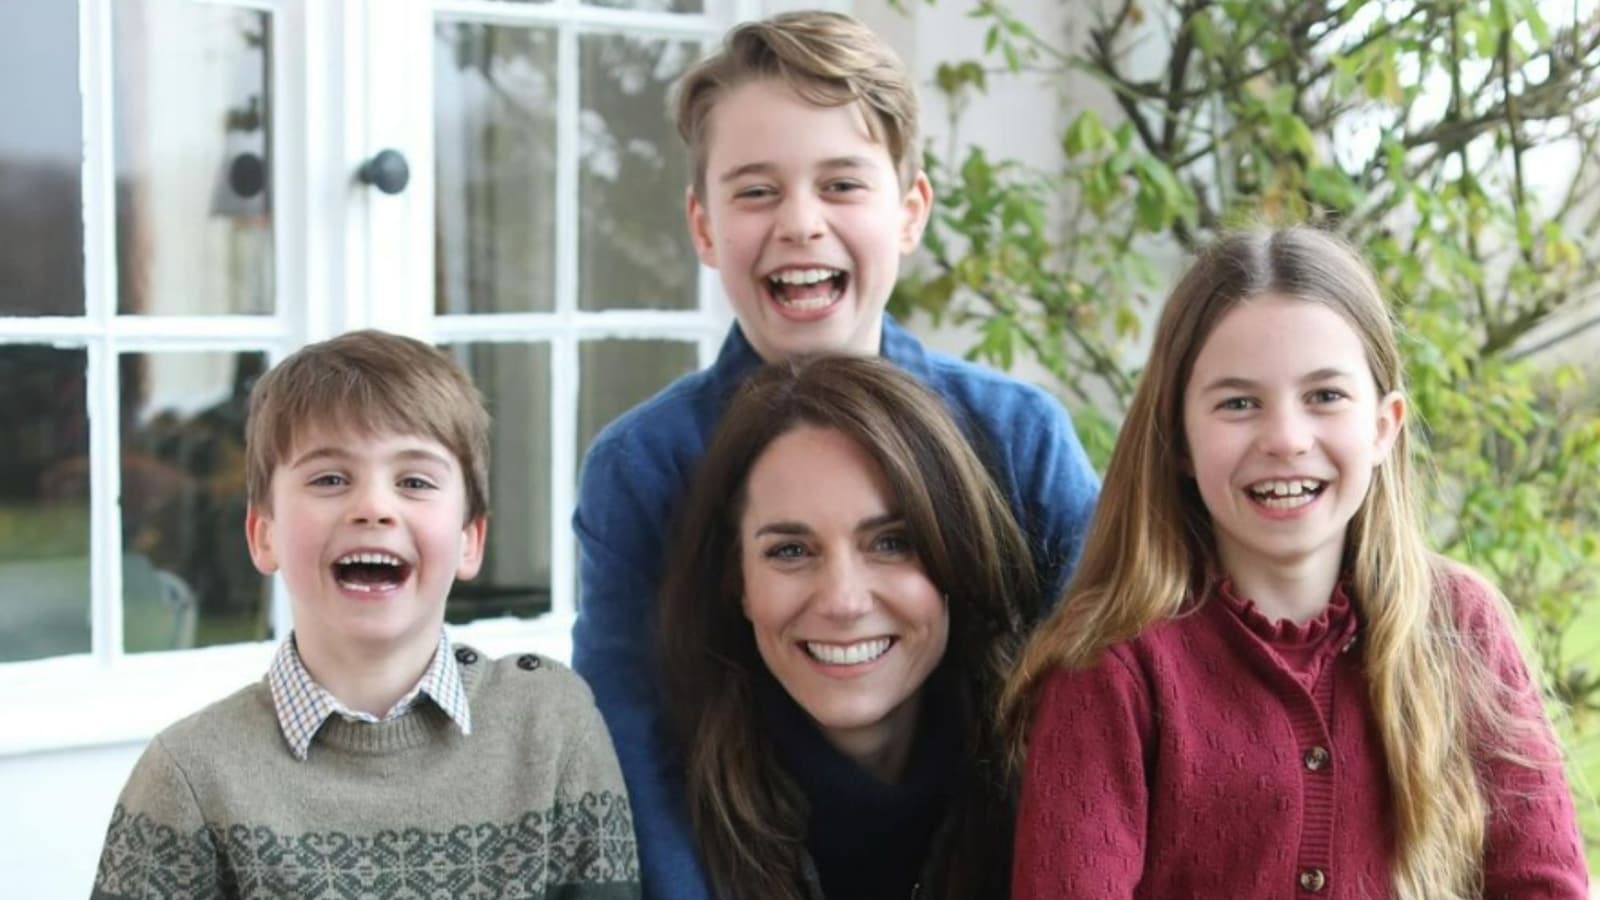 7 signs that suggest Kate Middleton’s Mother’s Day family picture ‘clicked’ by Prince William was edited